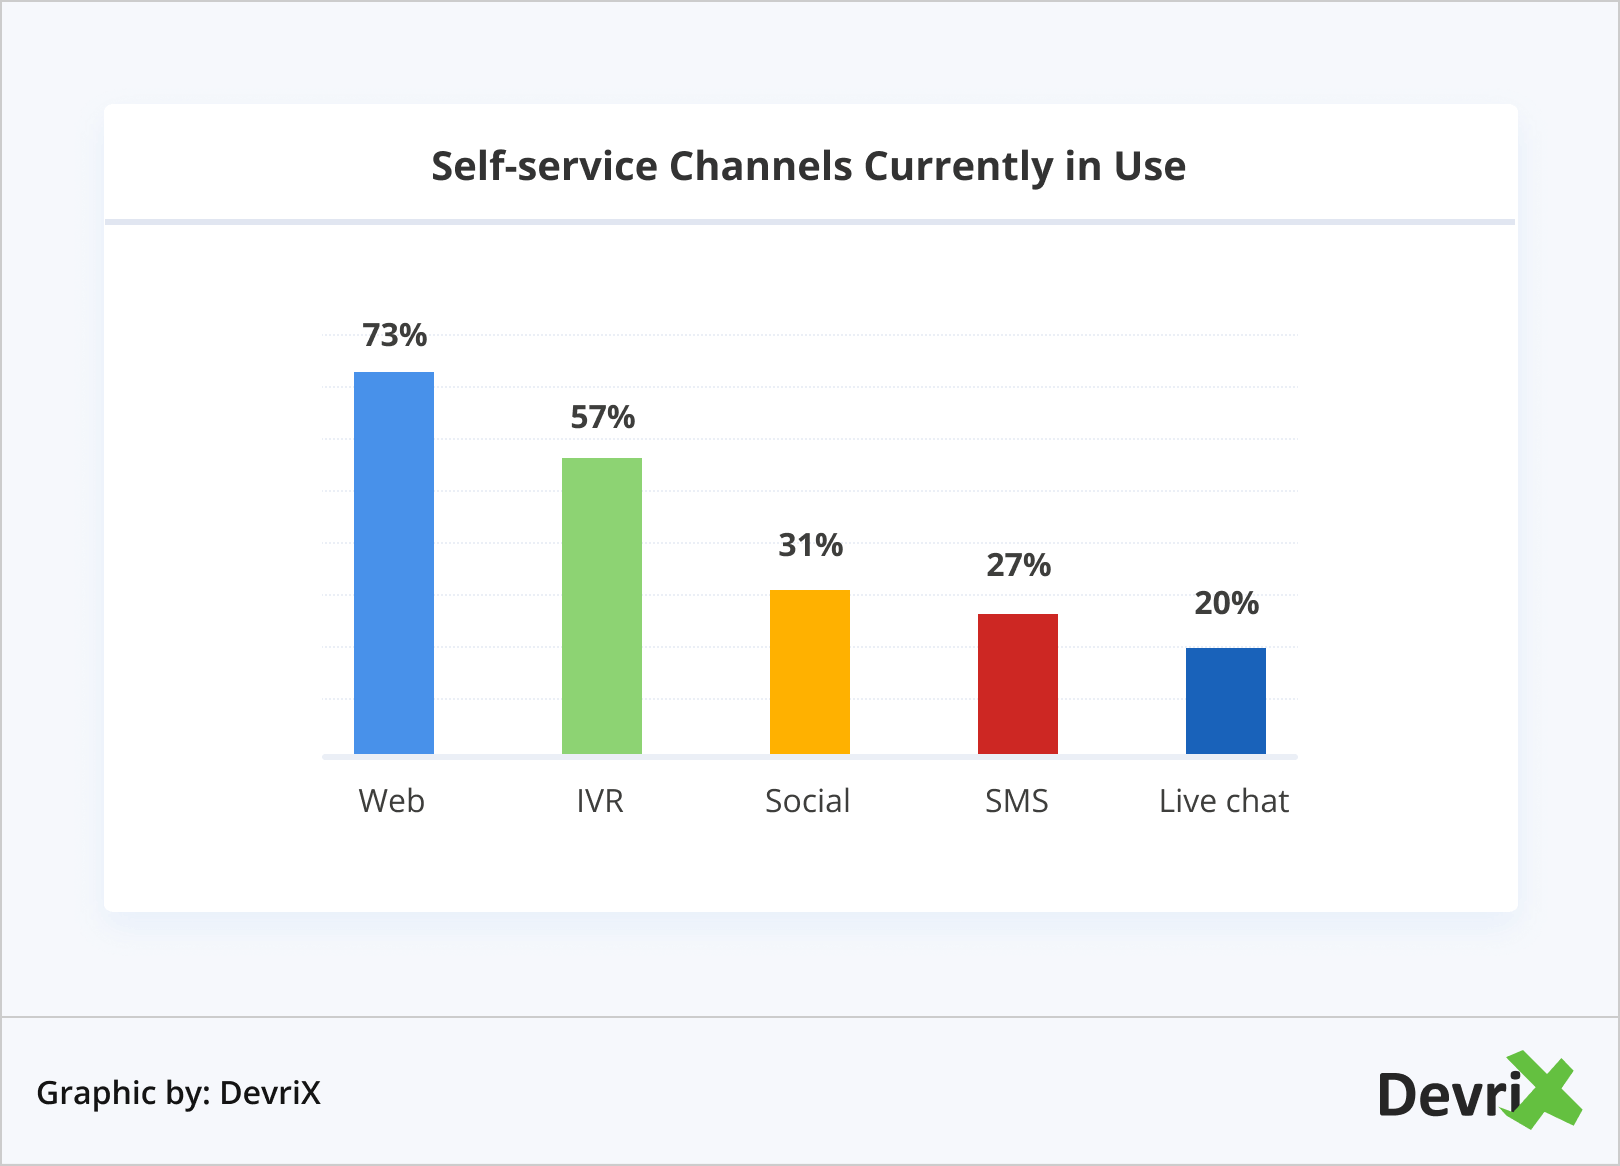 Self-service Channels Currently in Use